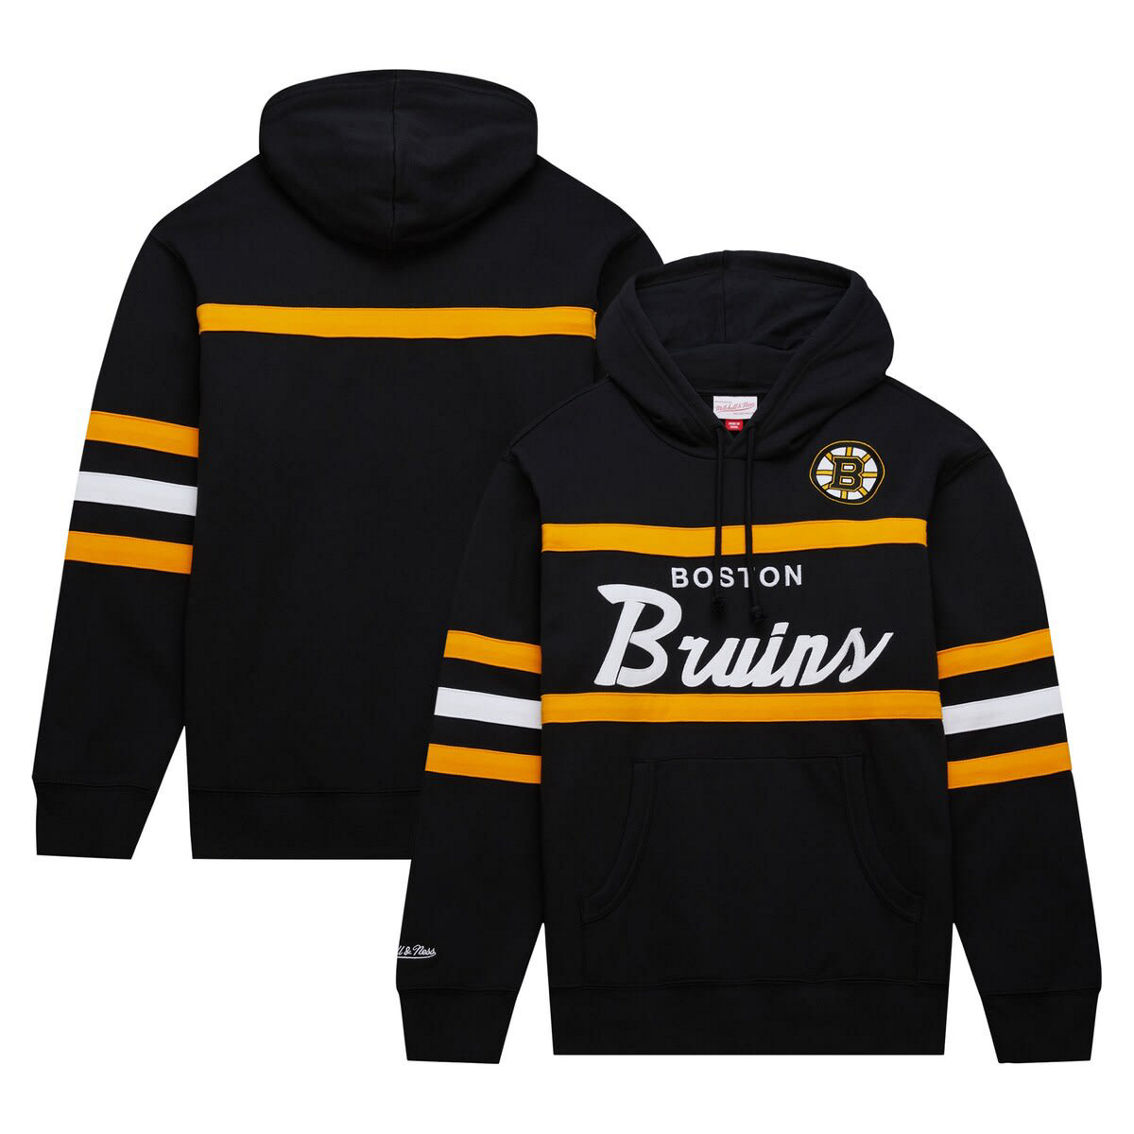 Mitchell & Ness Men's Black Boston Bruins Head Coach Pullover Hoodie - Image 2 of 4